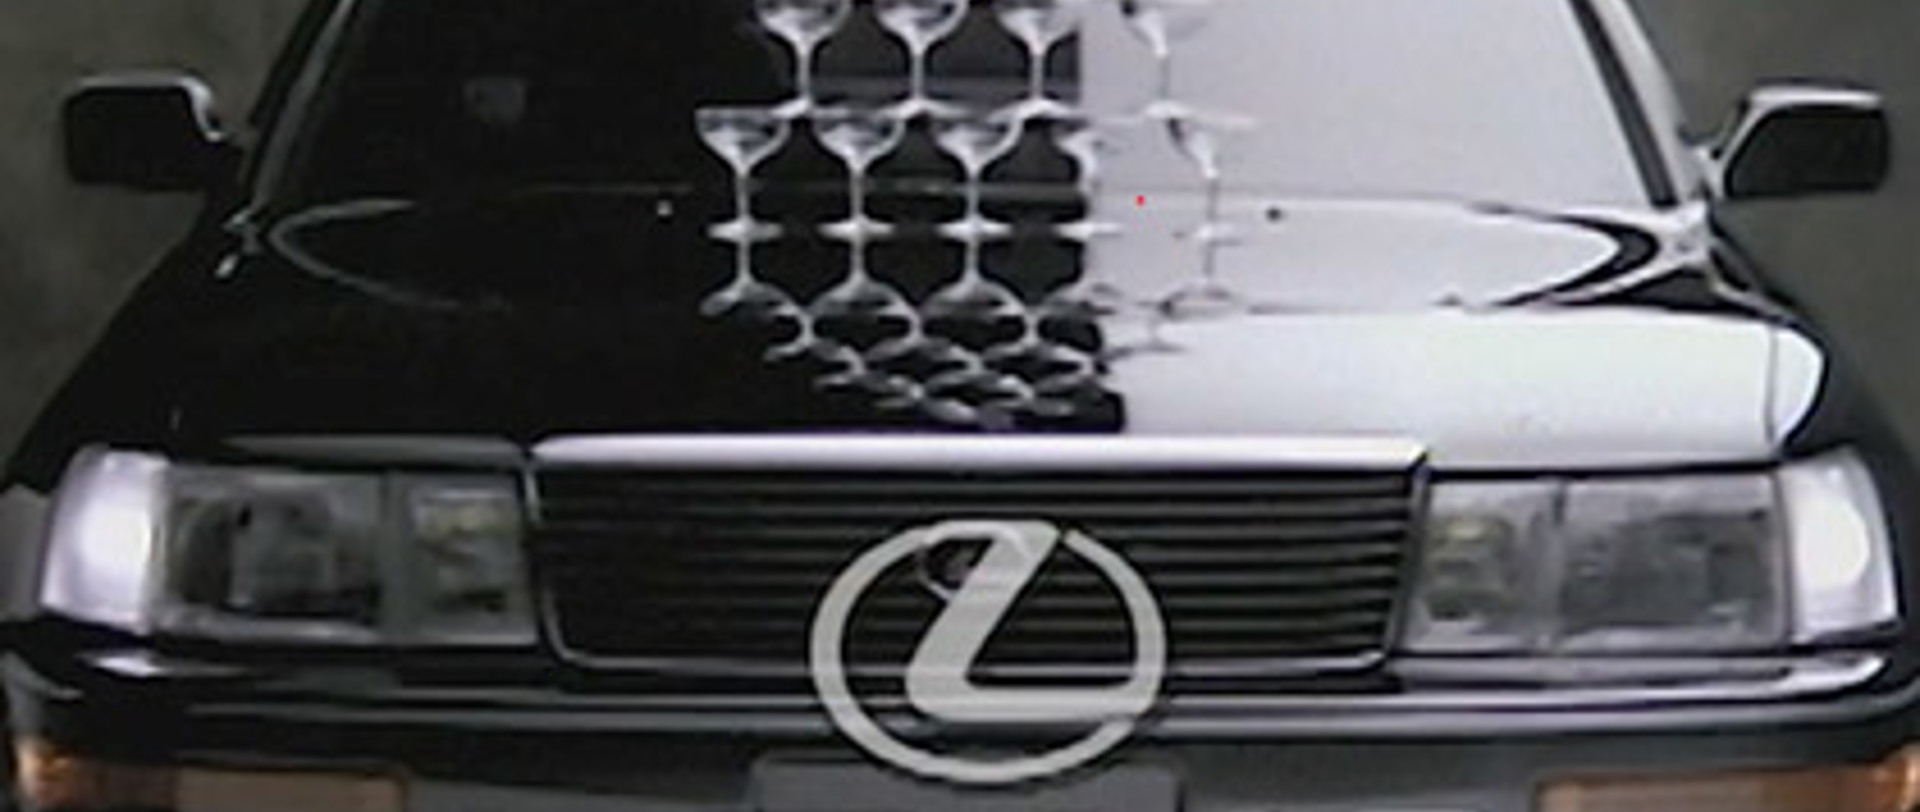 THE ARRIVAL OF THE FIRST LEXUS LS